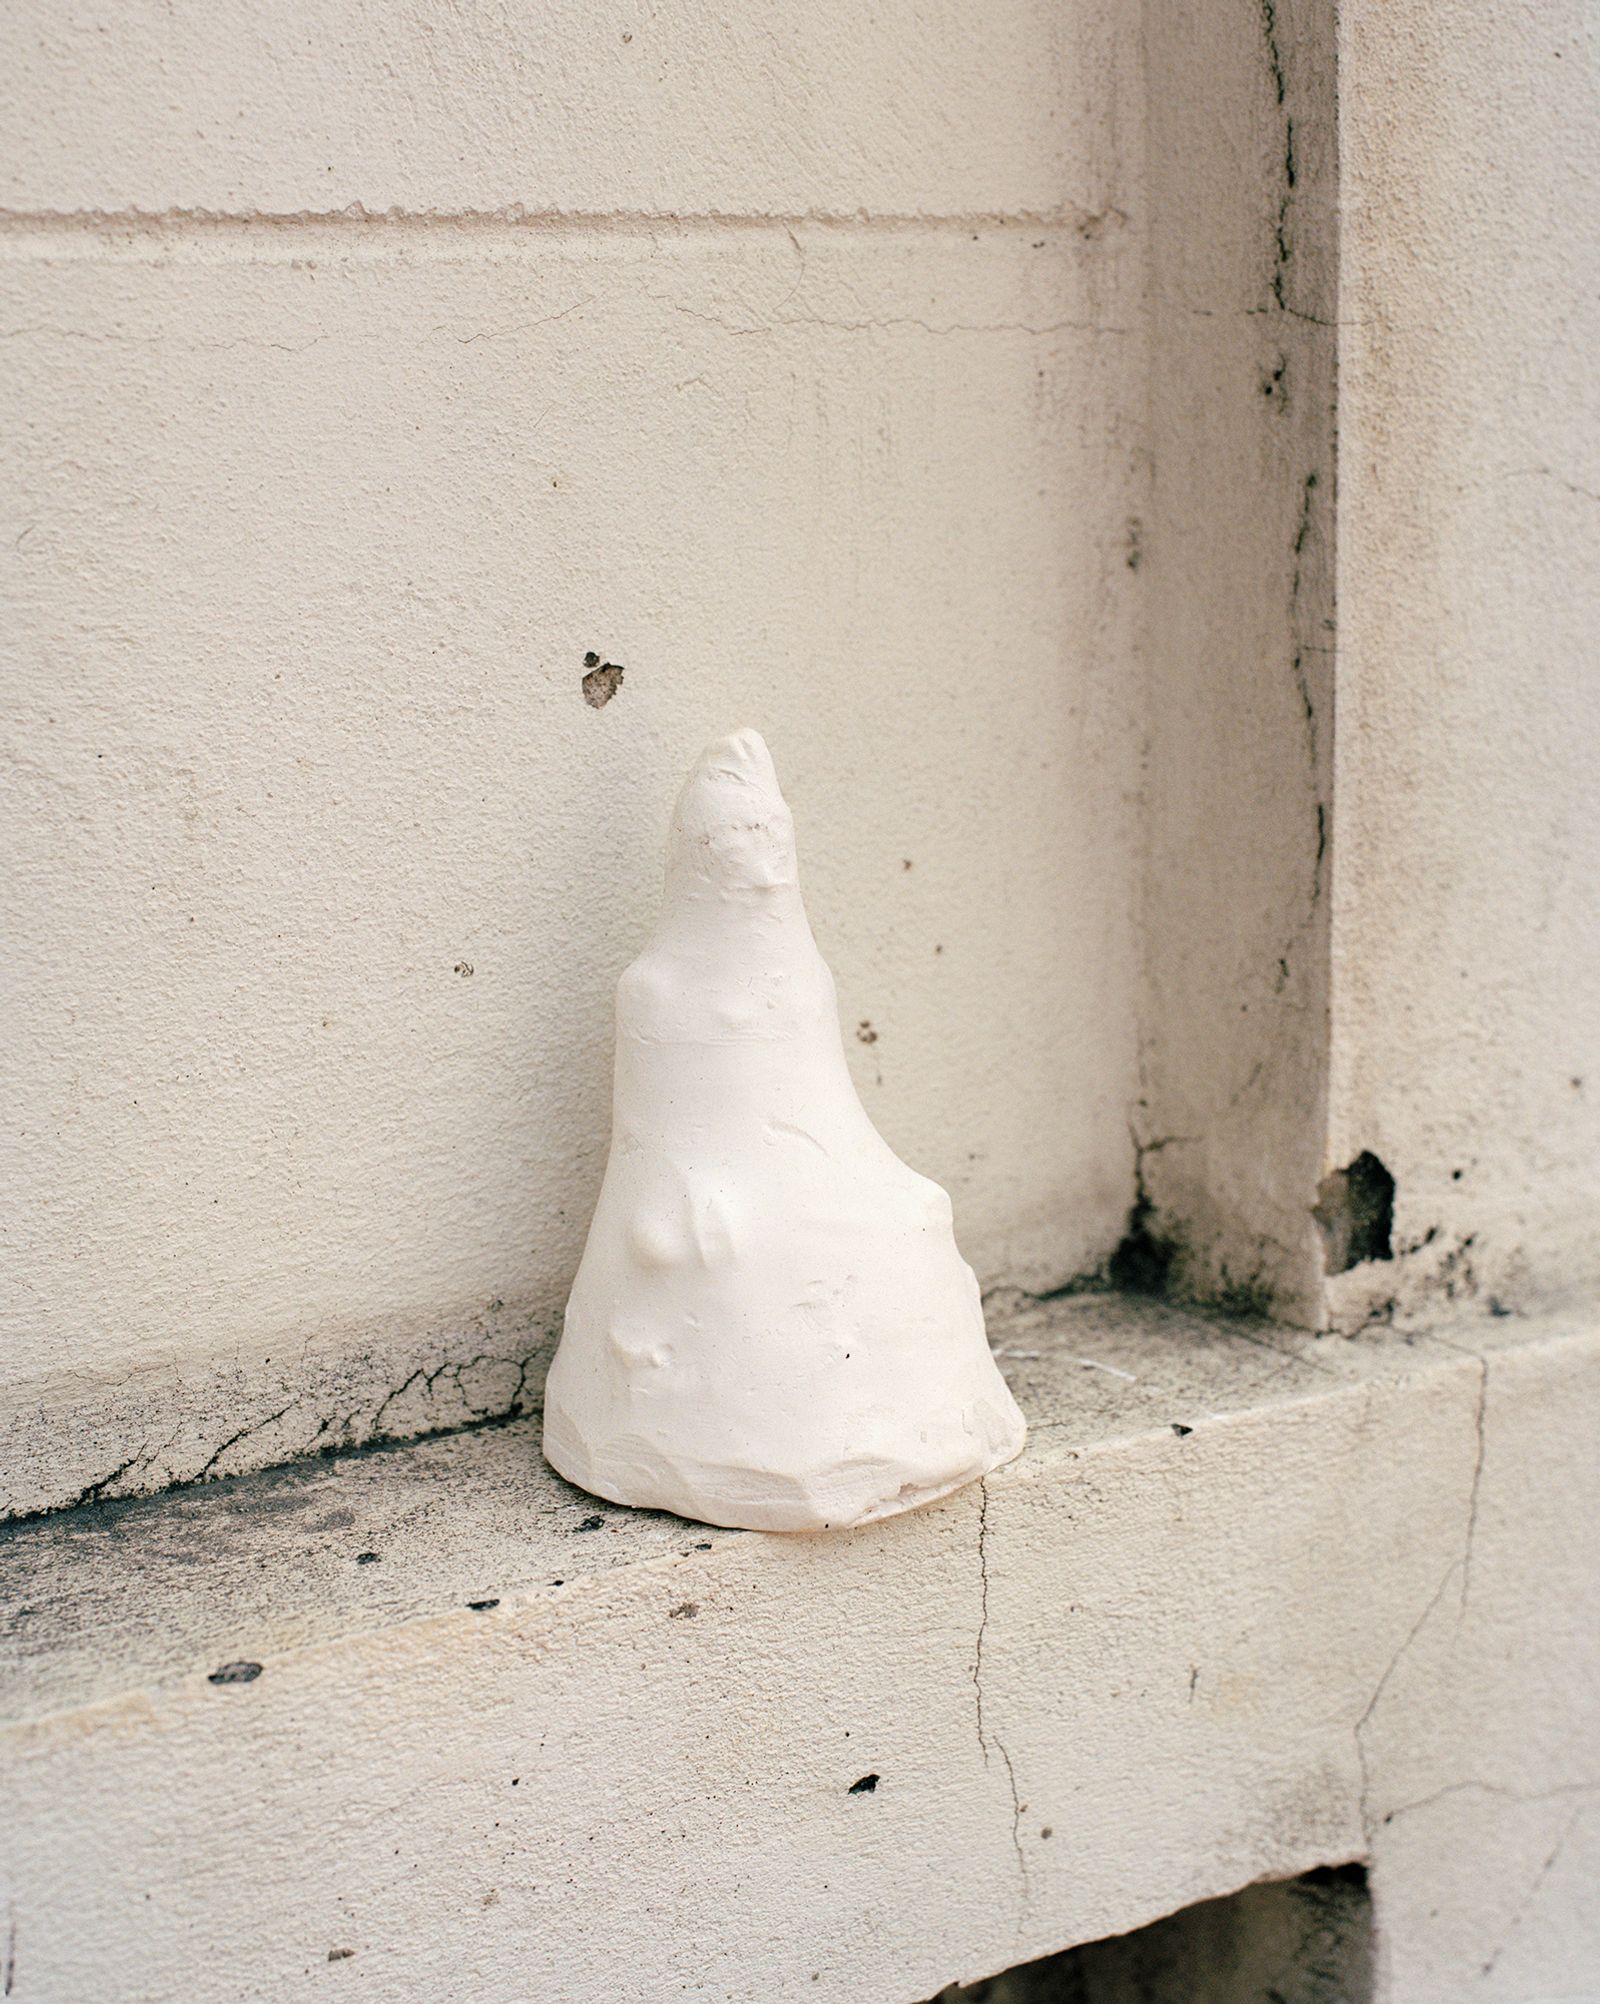 © Marjolaine Gallet - Image from the I Feel Bad About Inanimate Objects All the Time photography project